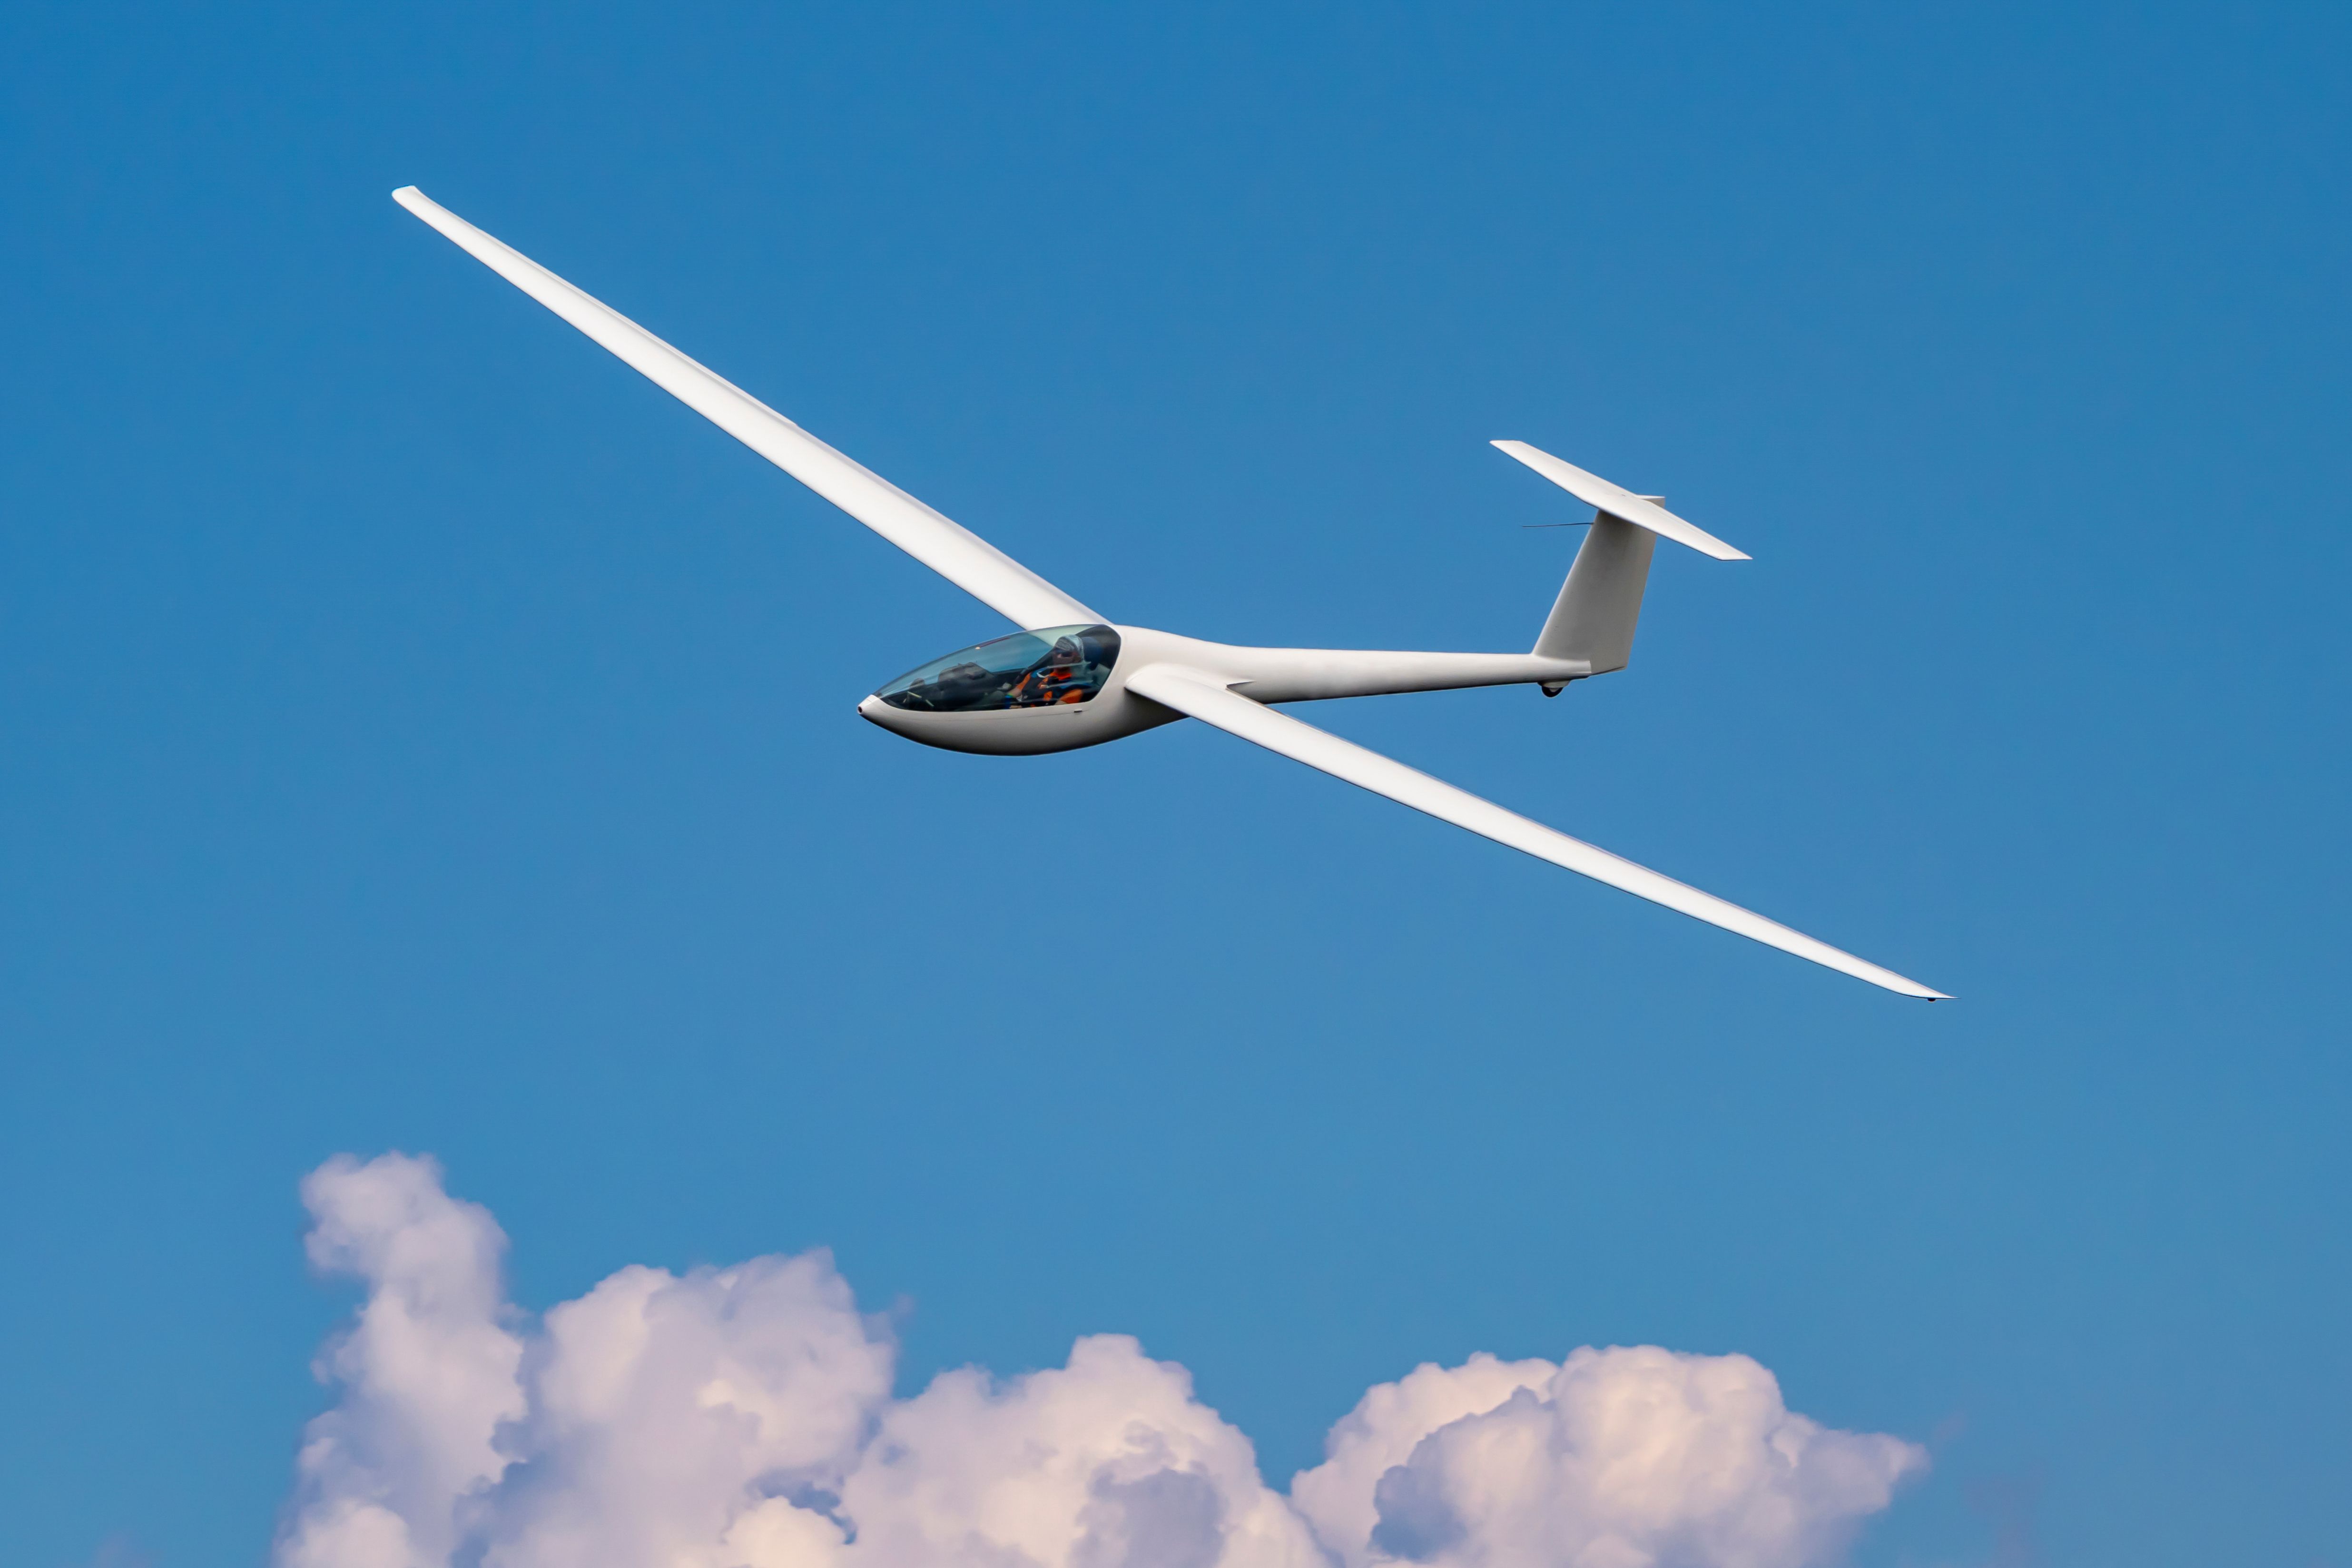 A glider flying at cloud level.